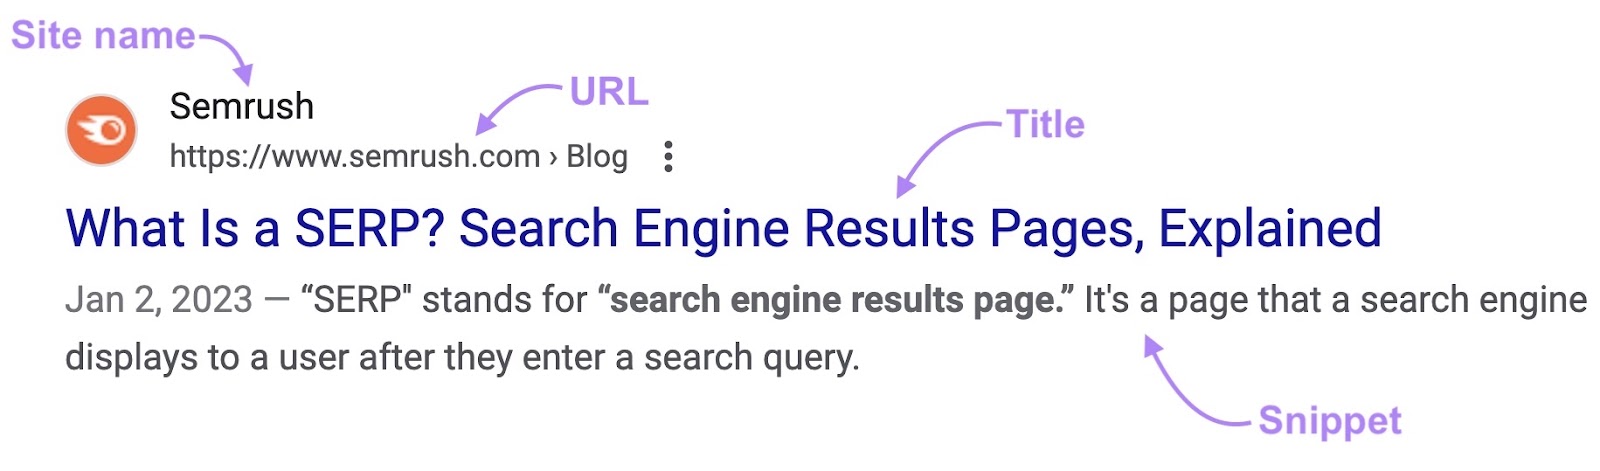 A SERP effect   with tract  name, URL, rubric  and a snippet labels